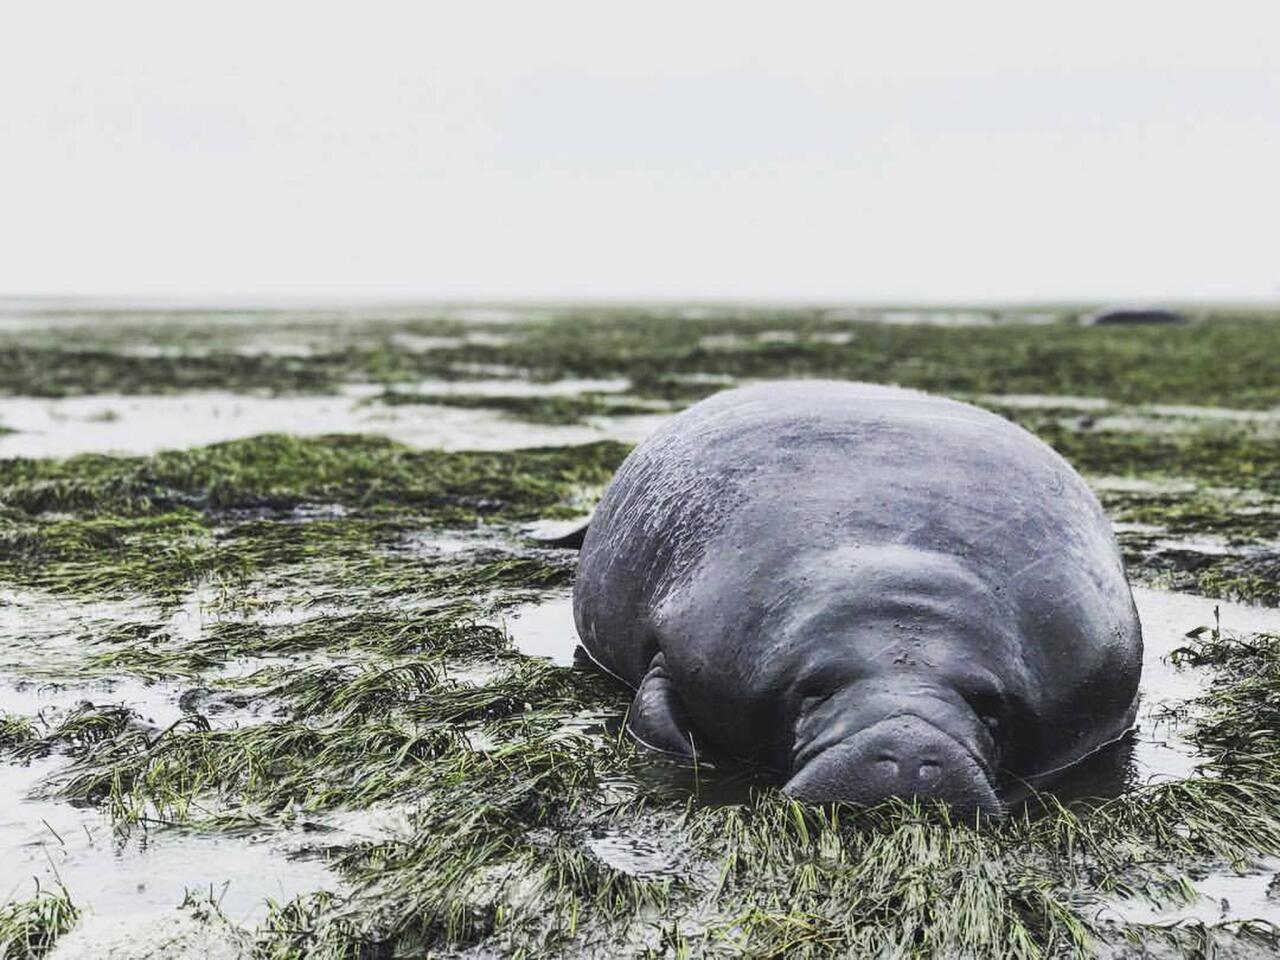 This photo provided by Michael Sechler shows a stranded manatee in Manatee County, Fla., on Sept. 10, 2017. The mammal was stranded after waters receded from the Florida bay as Hurricane Irma approached.